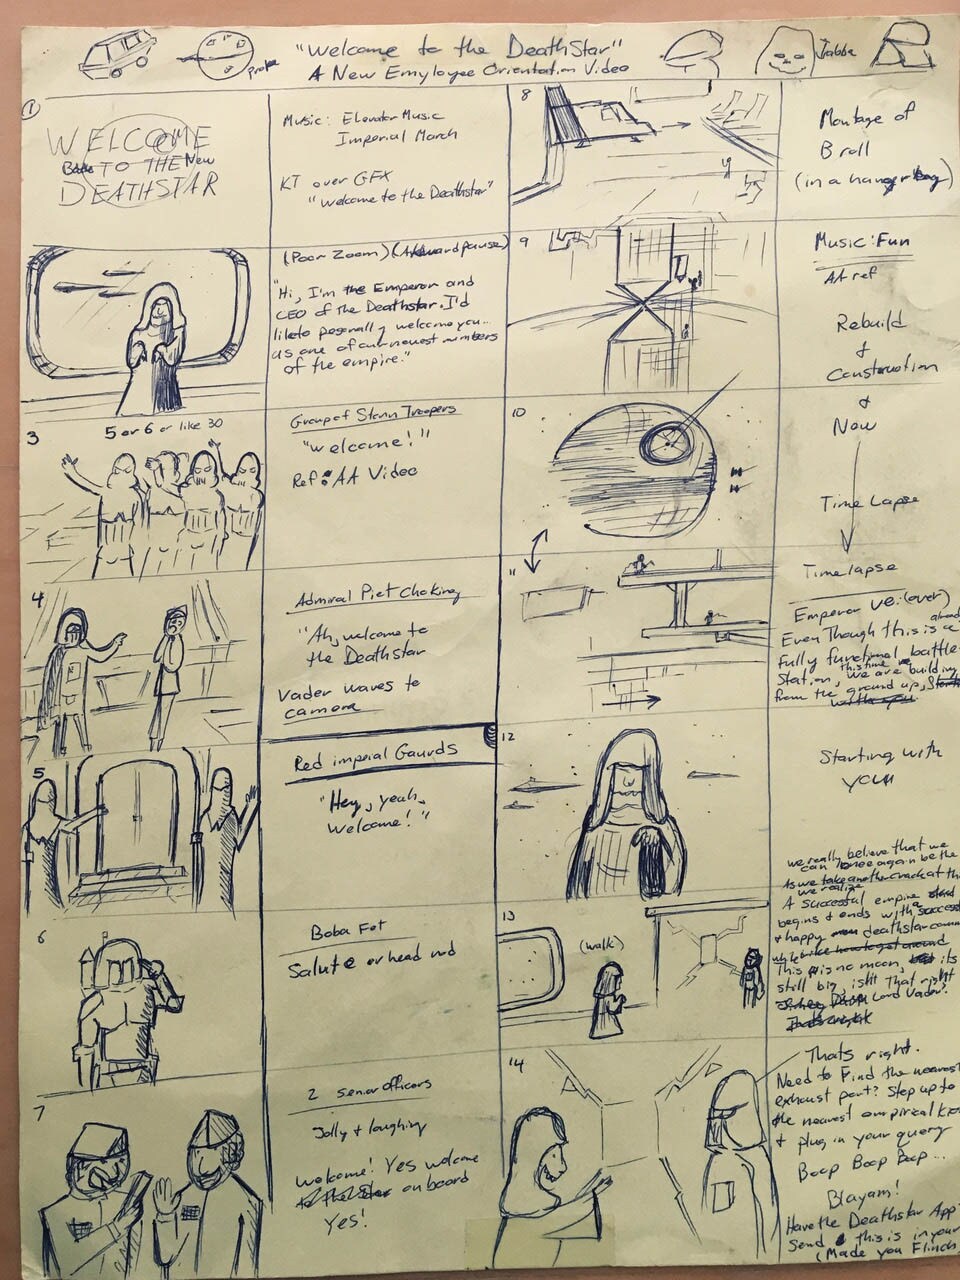 The original storyboards from "Star Wars: A New Employee Orientation."